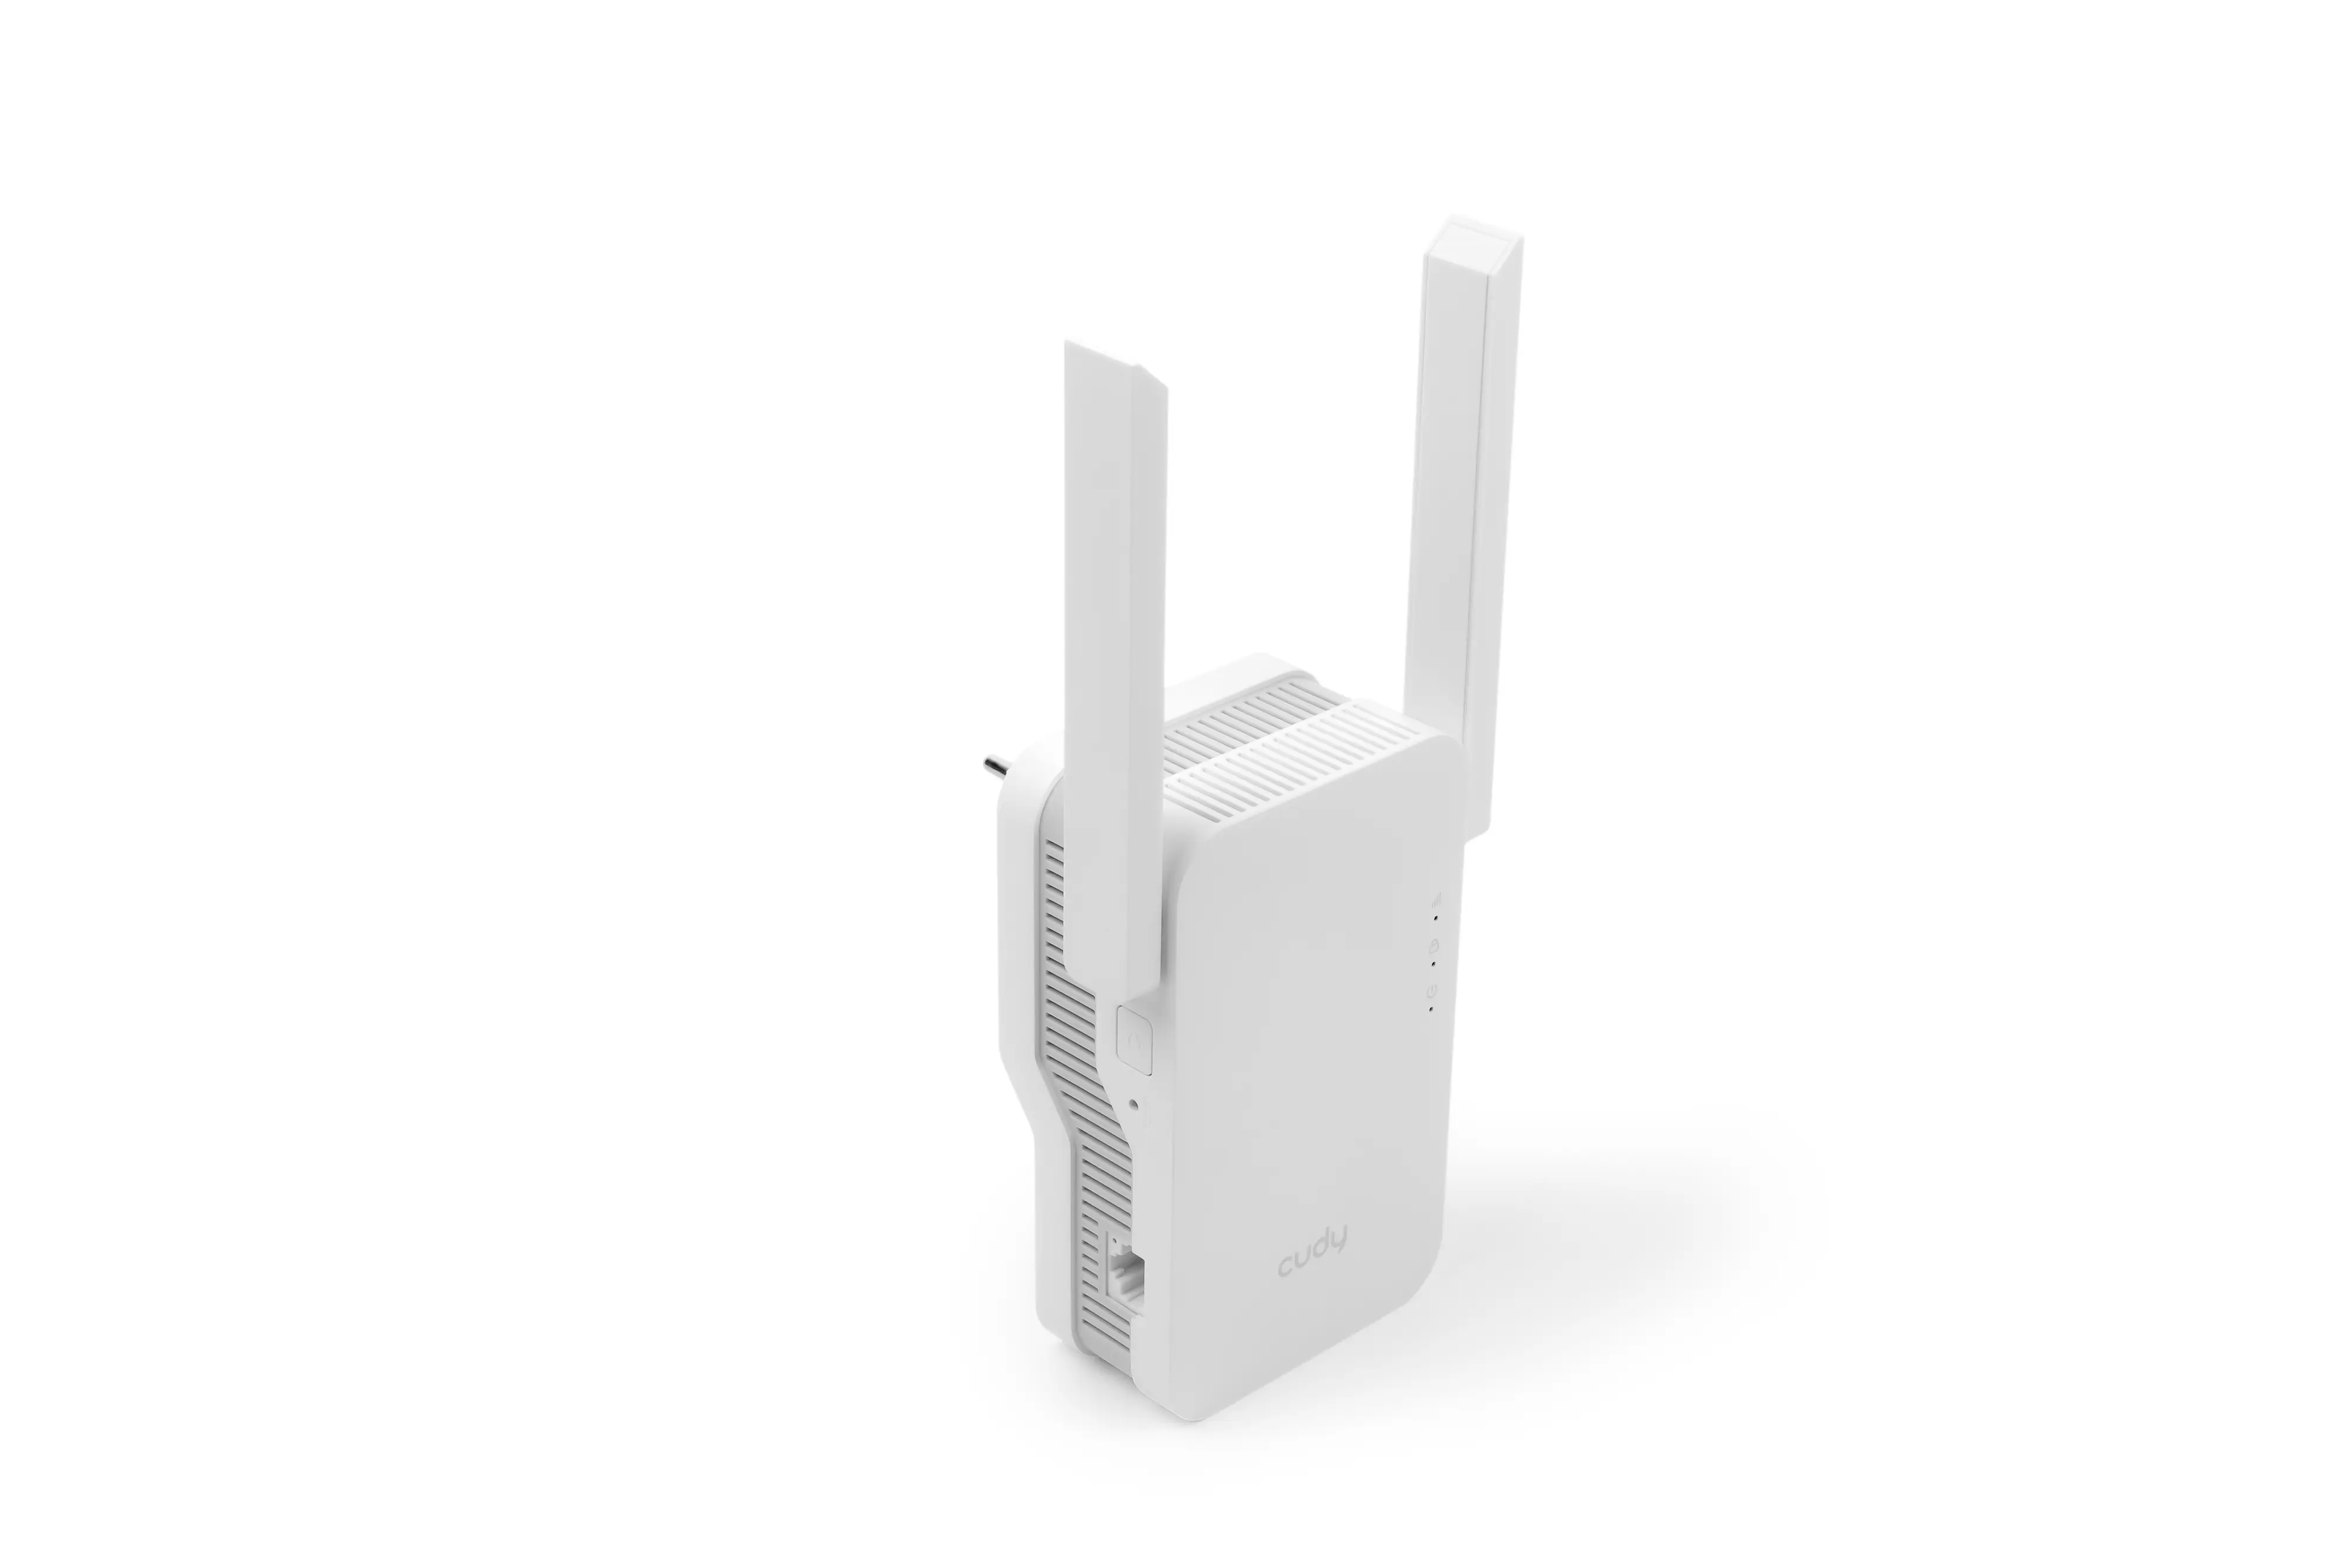 Zestaw Router Mesh Cudy M1800 AX1800 Dual Band WiFi 6 zestaw 2szt. + Repeater Cudy RE1800